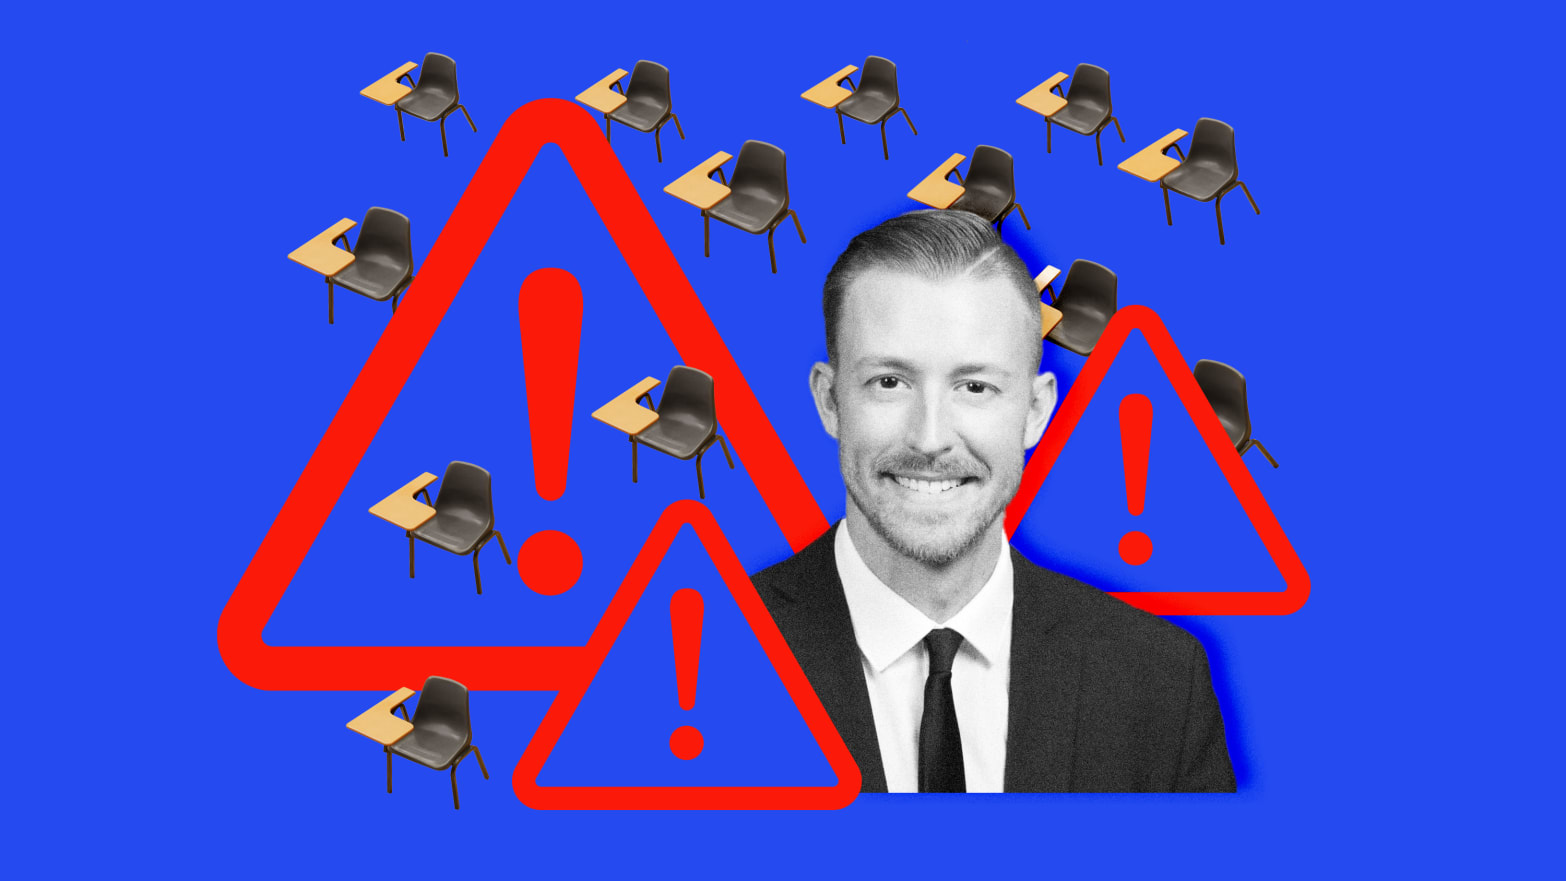 A photo illustration of Oklahoma’s Superintendent of public Instruction Ryan Walters and threat warning symbols and empty school desks.